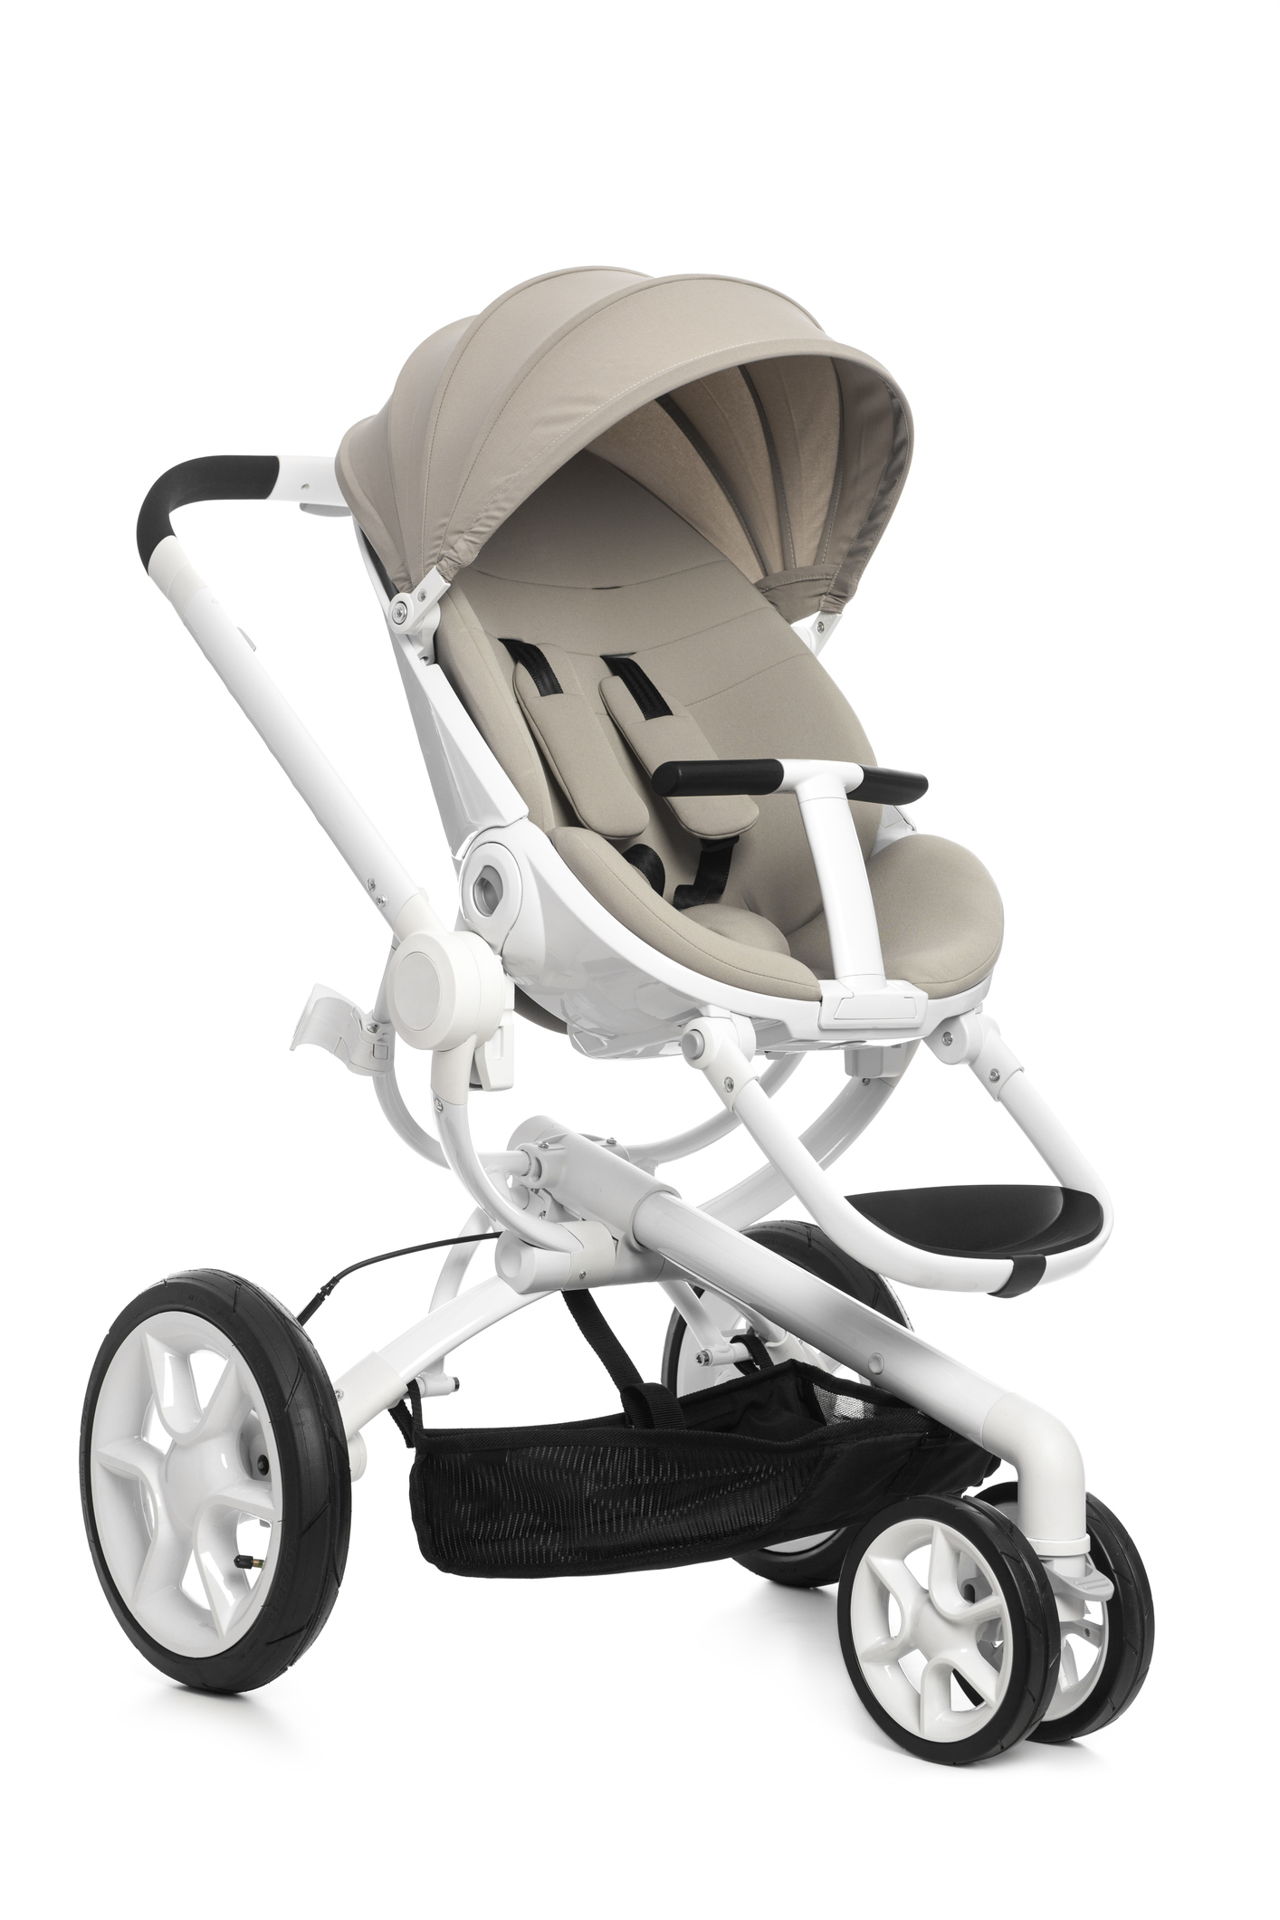 difference between pushchair and buggy